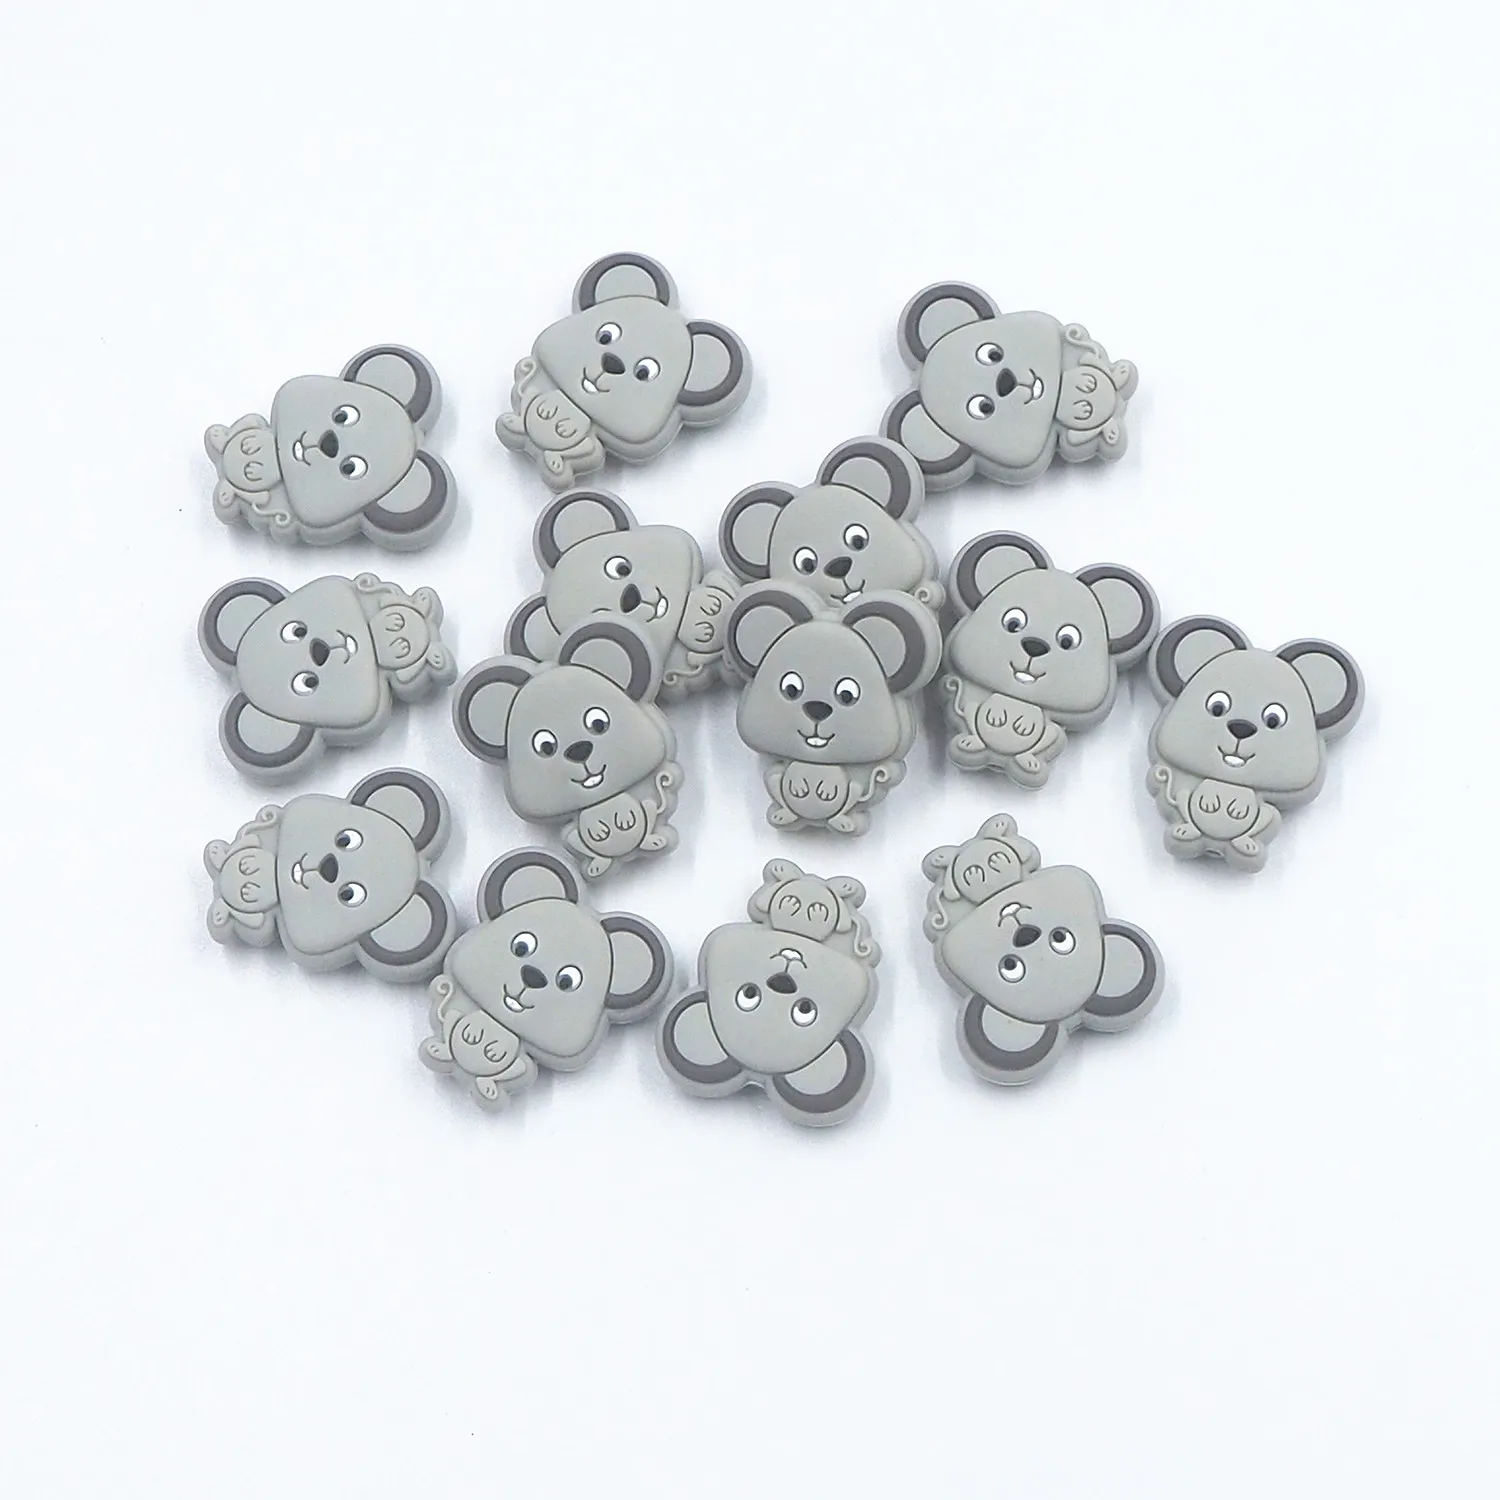 Chenkai 50PCS Cattle Focal Beads Silicone Charms For Pen Making Character  Beads For Beadable Pen DIY Baby Pacifier Dummy Chains